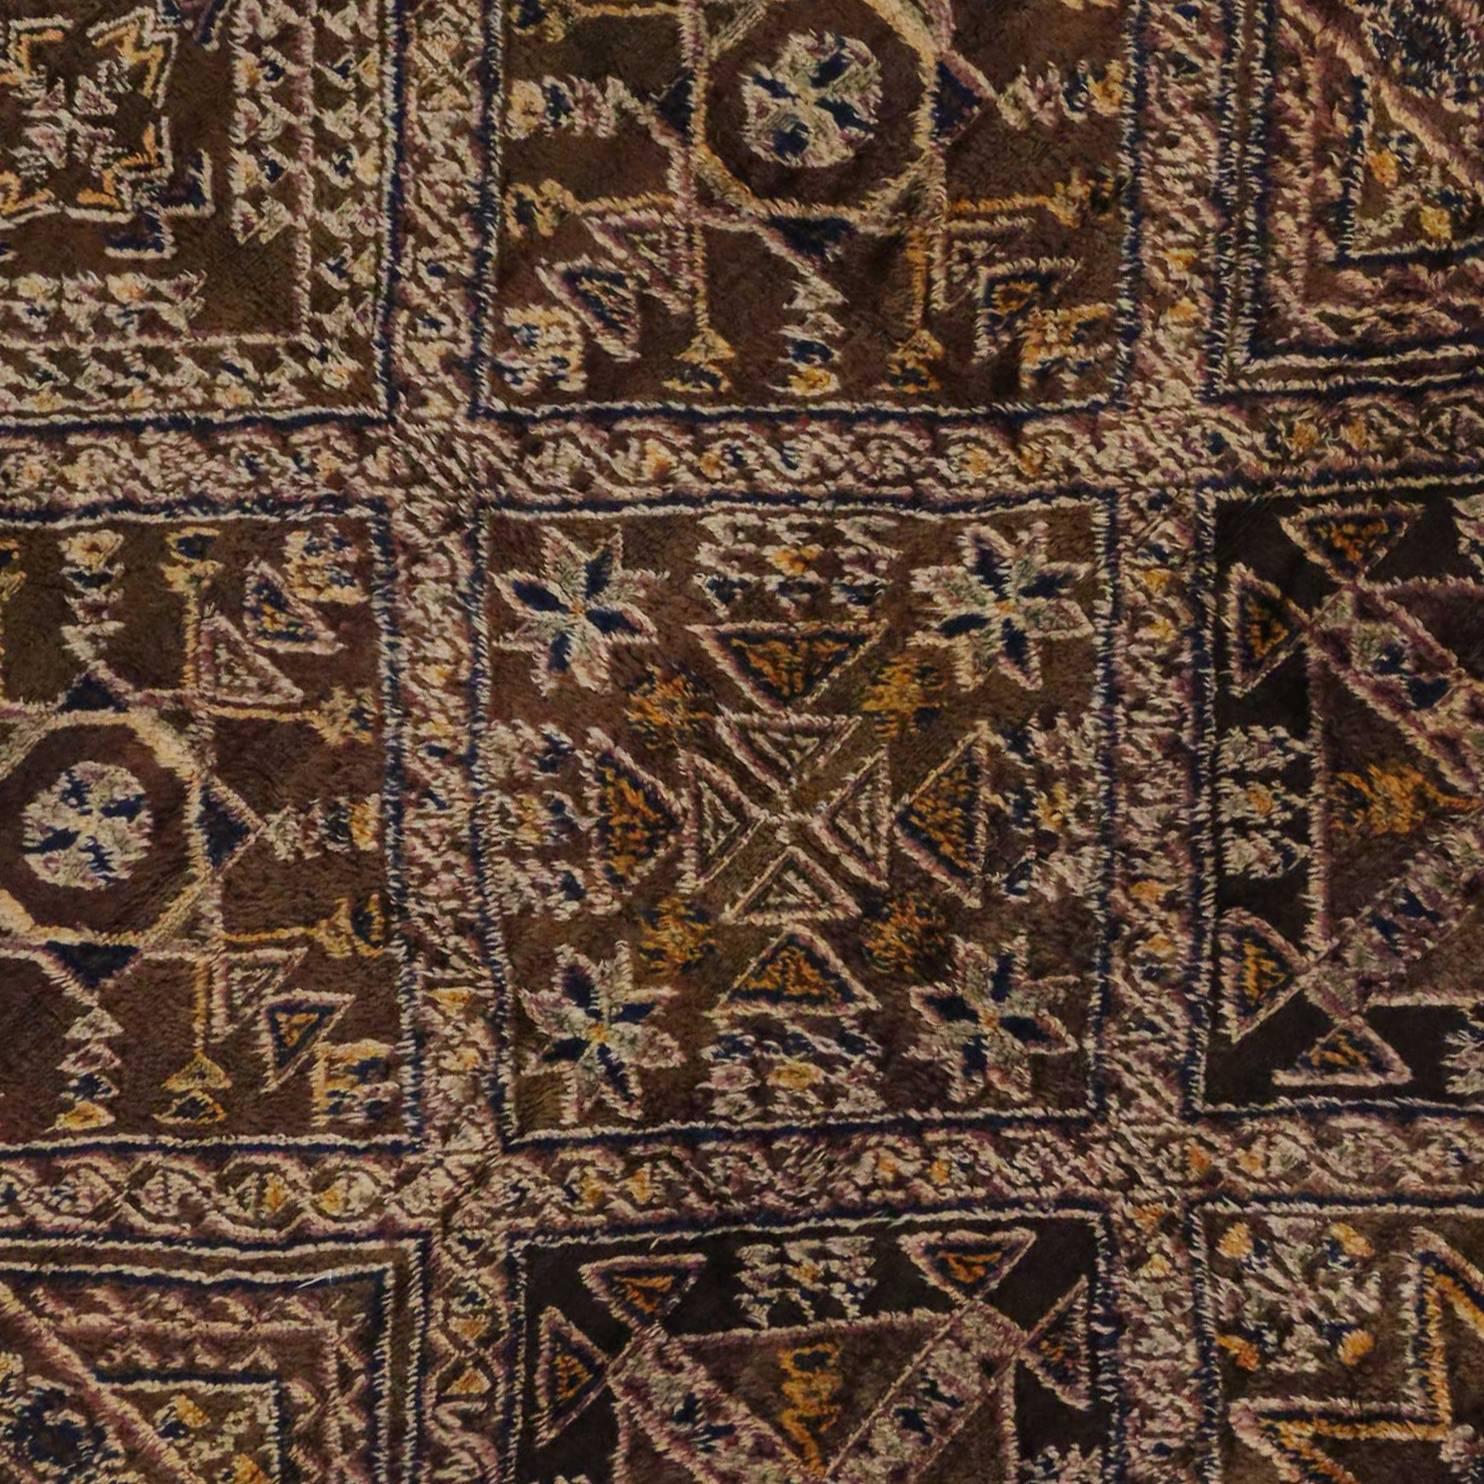 Hand-Knotted Vintage Chocolate Beni M'Guild Moroccan Rug with Biophilic Design Tribal Style